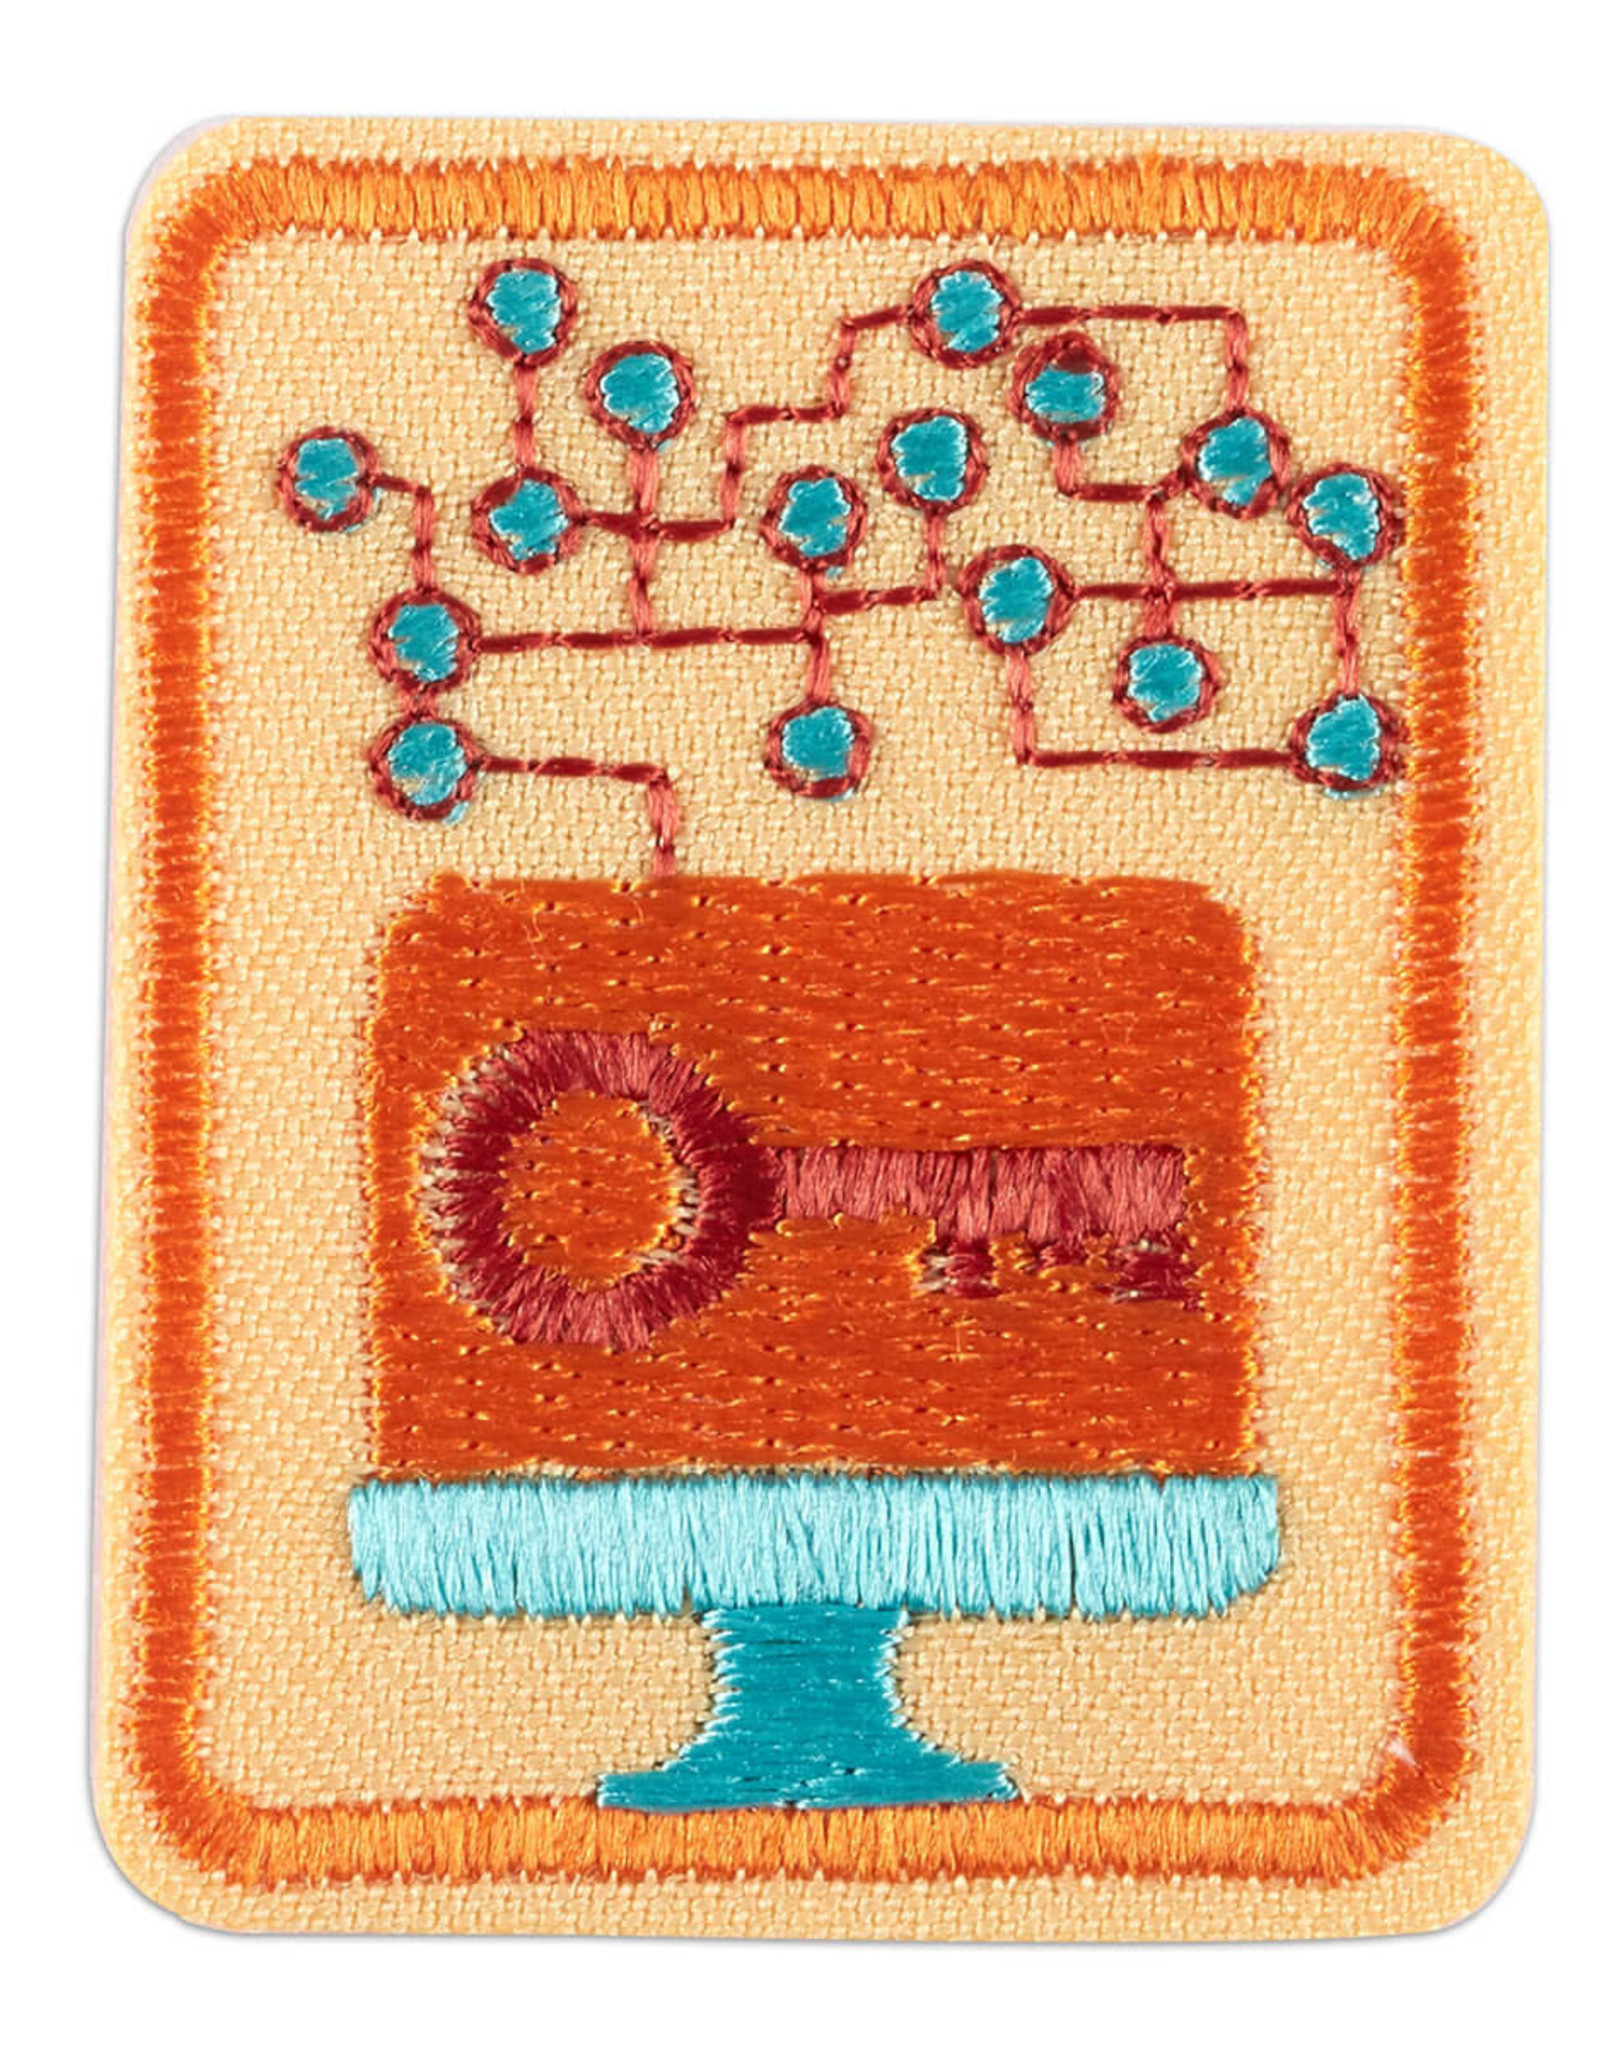 GIRL SCOUTS OF THE USA Senior Cybersecurity Basics 1 Badge